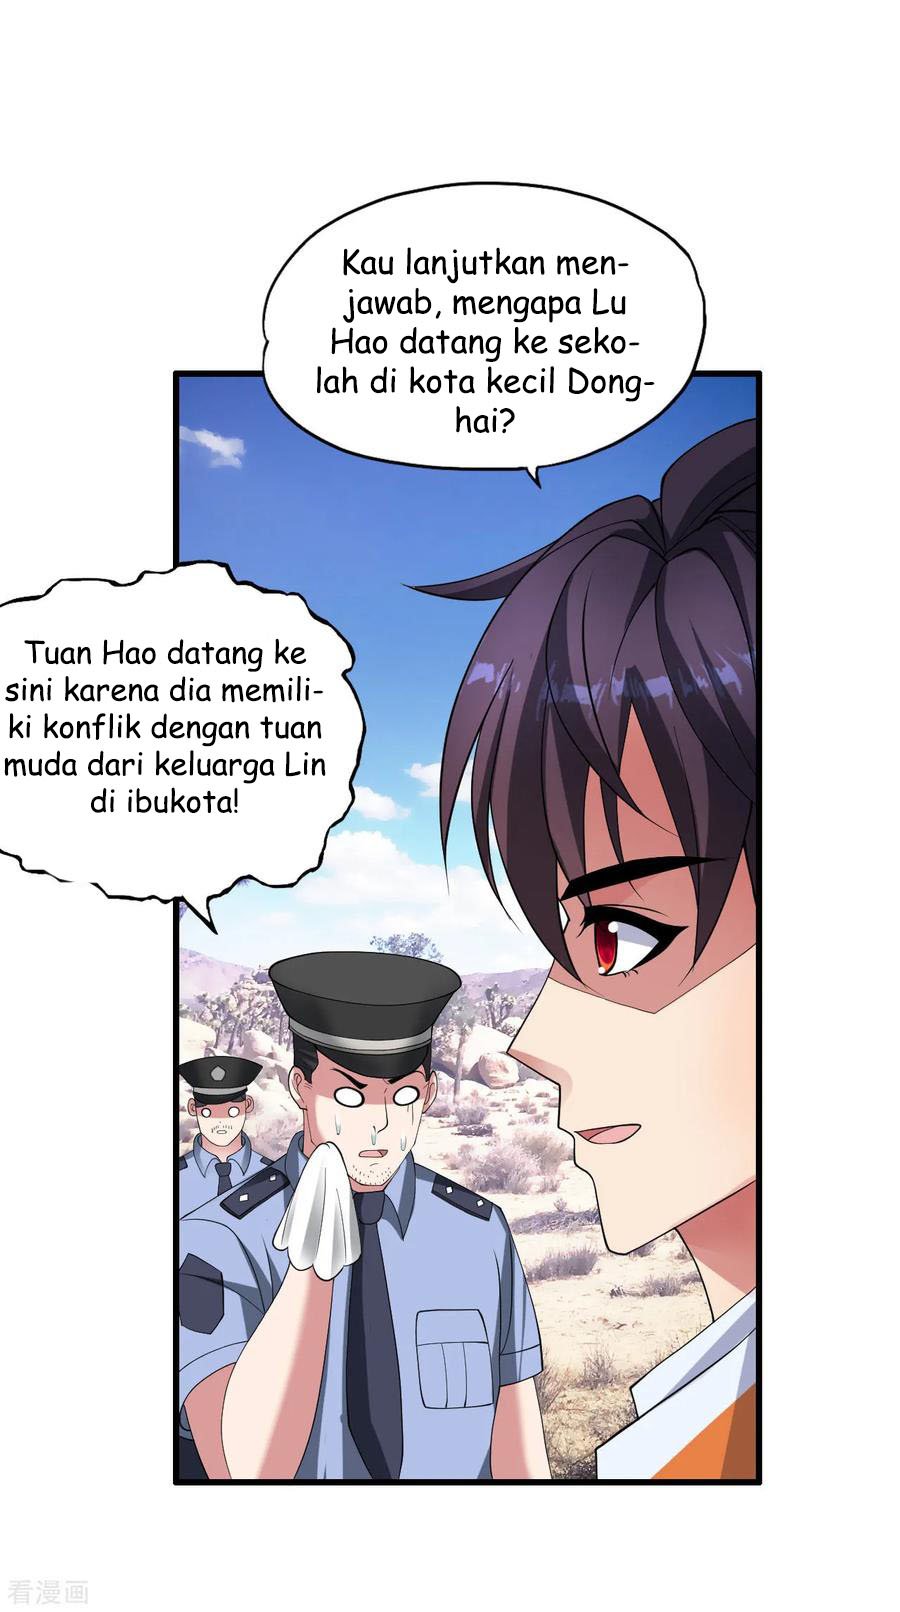 Medical Soldiers Chapter 26